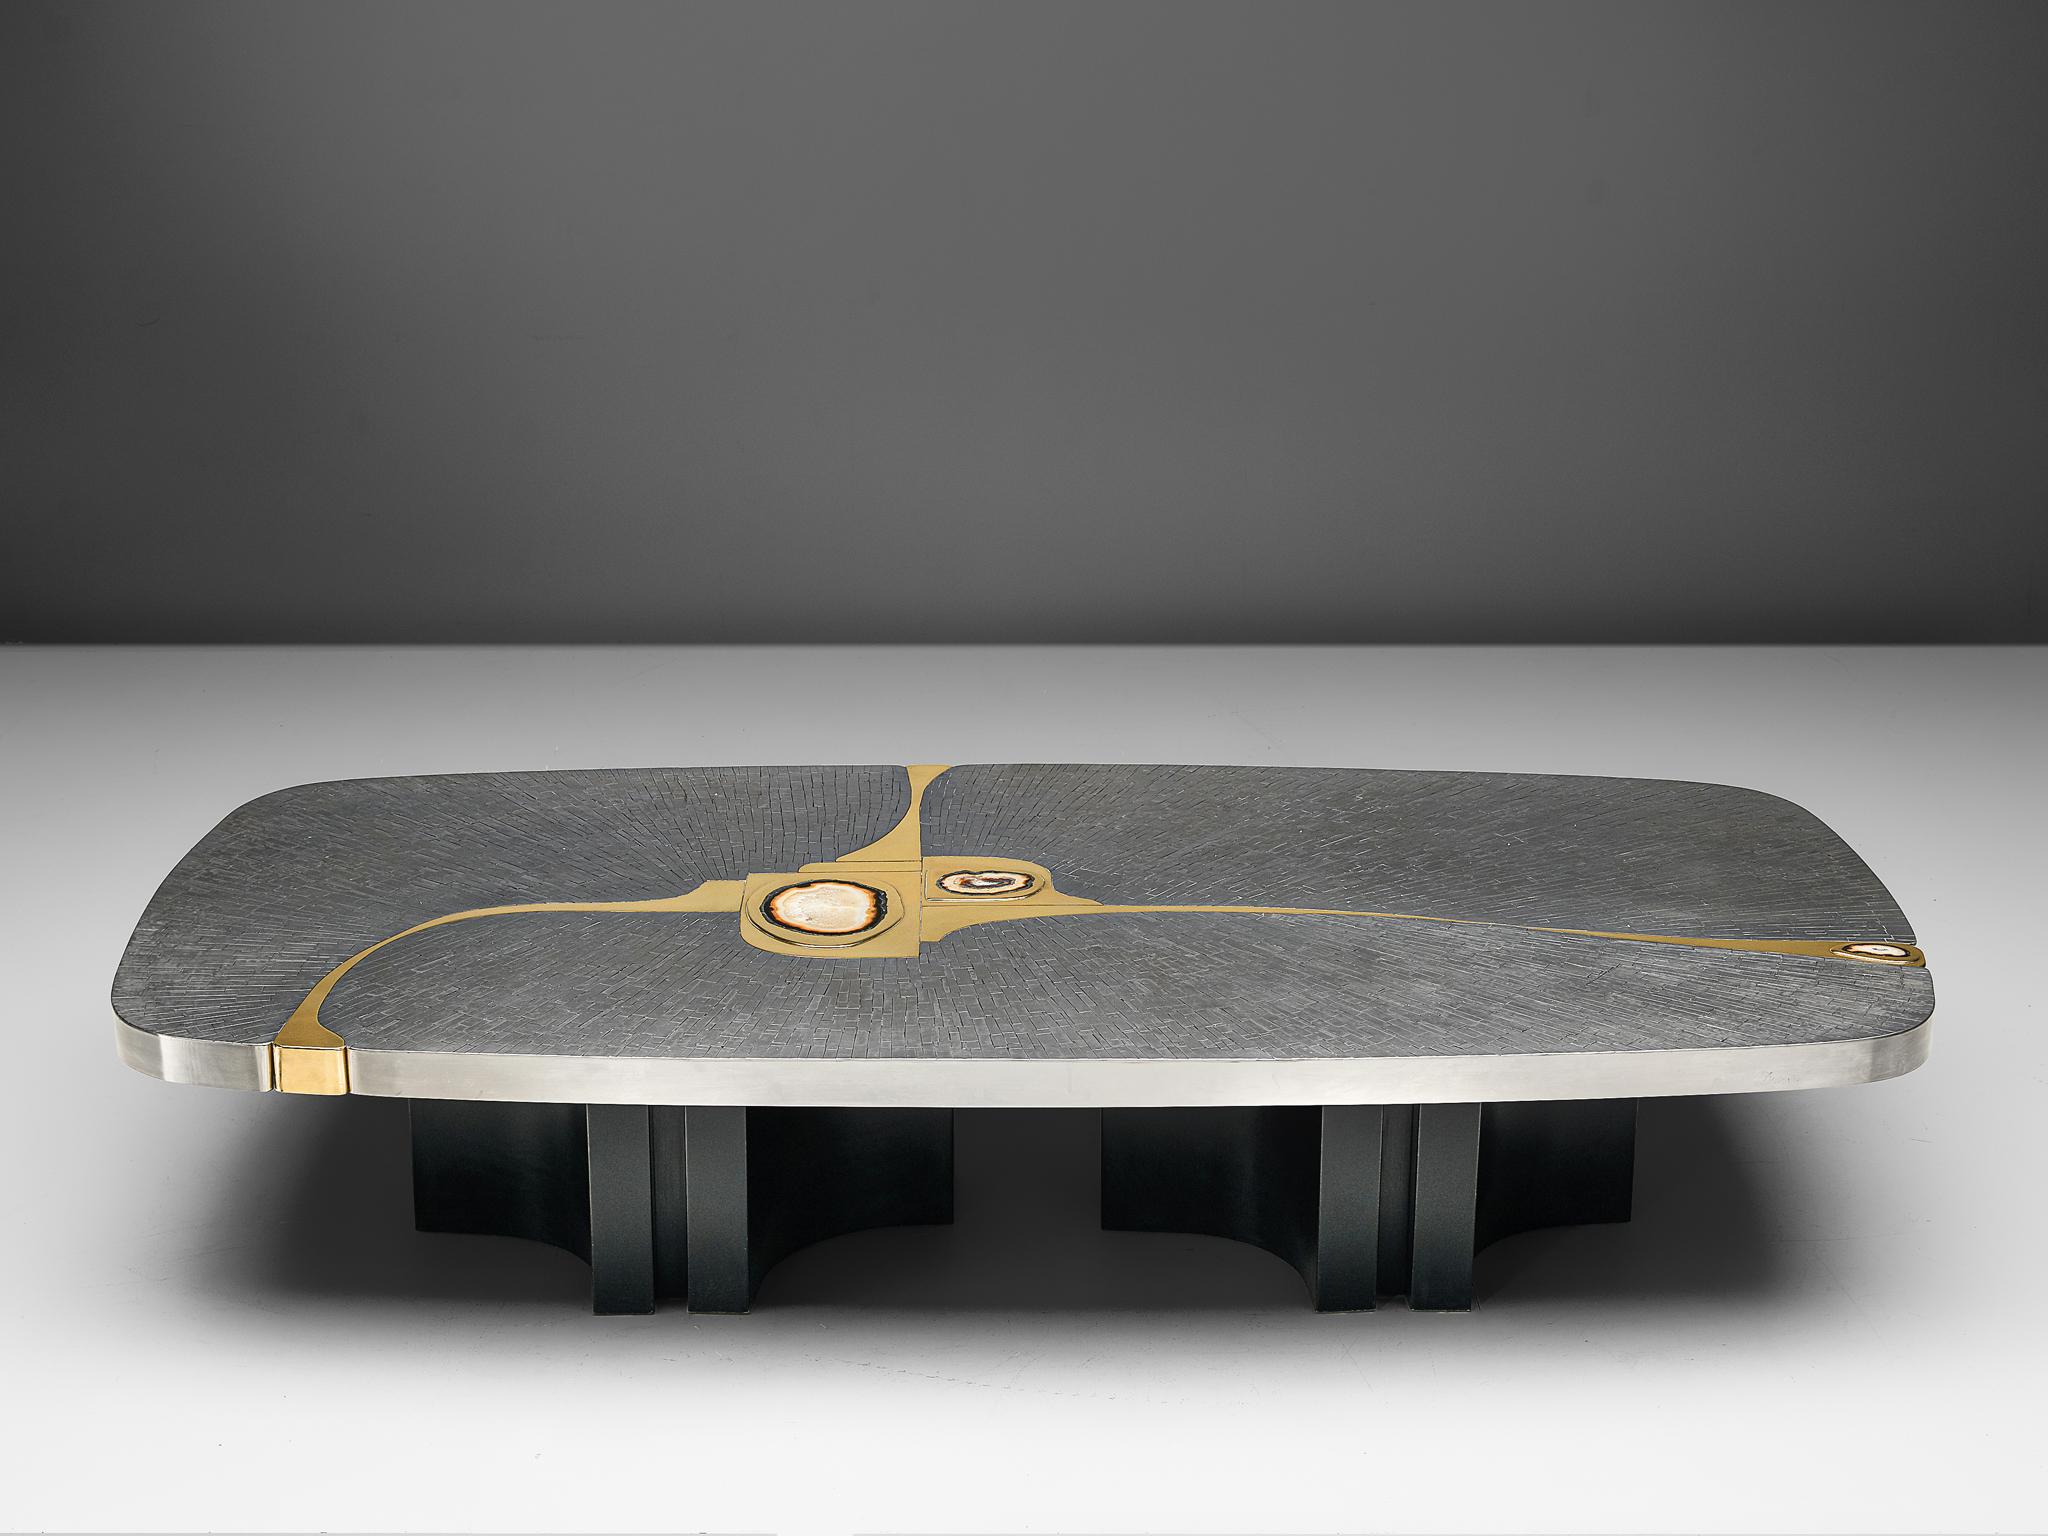 Jean Claude Dresse Steel and Brass Coffee Table with Inlayed Agate 2